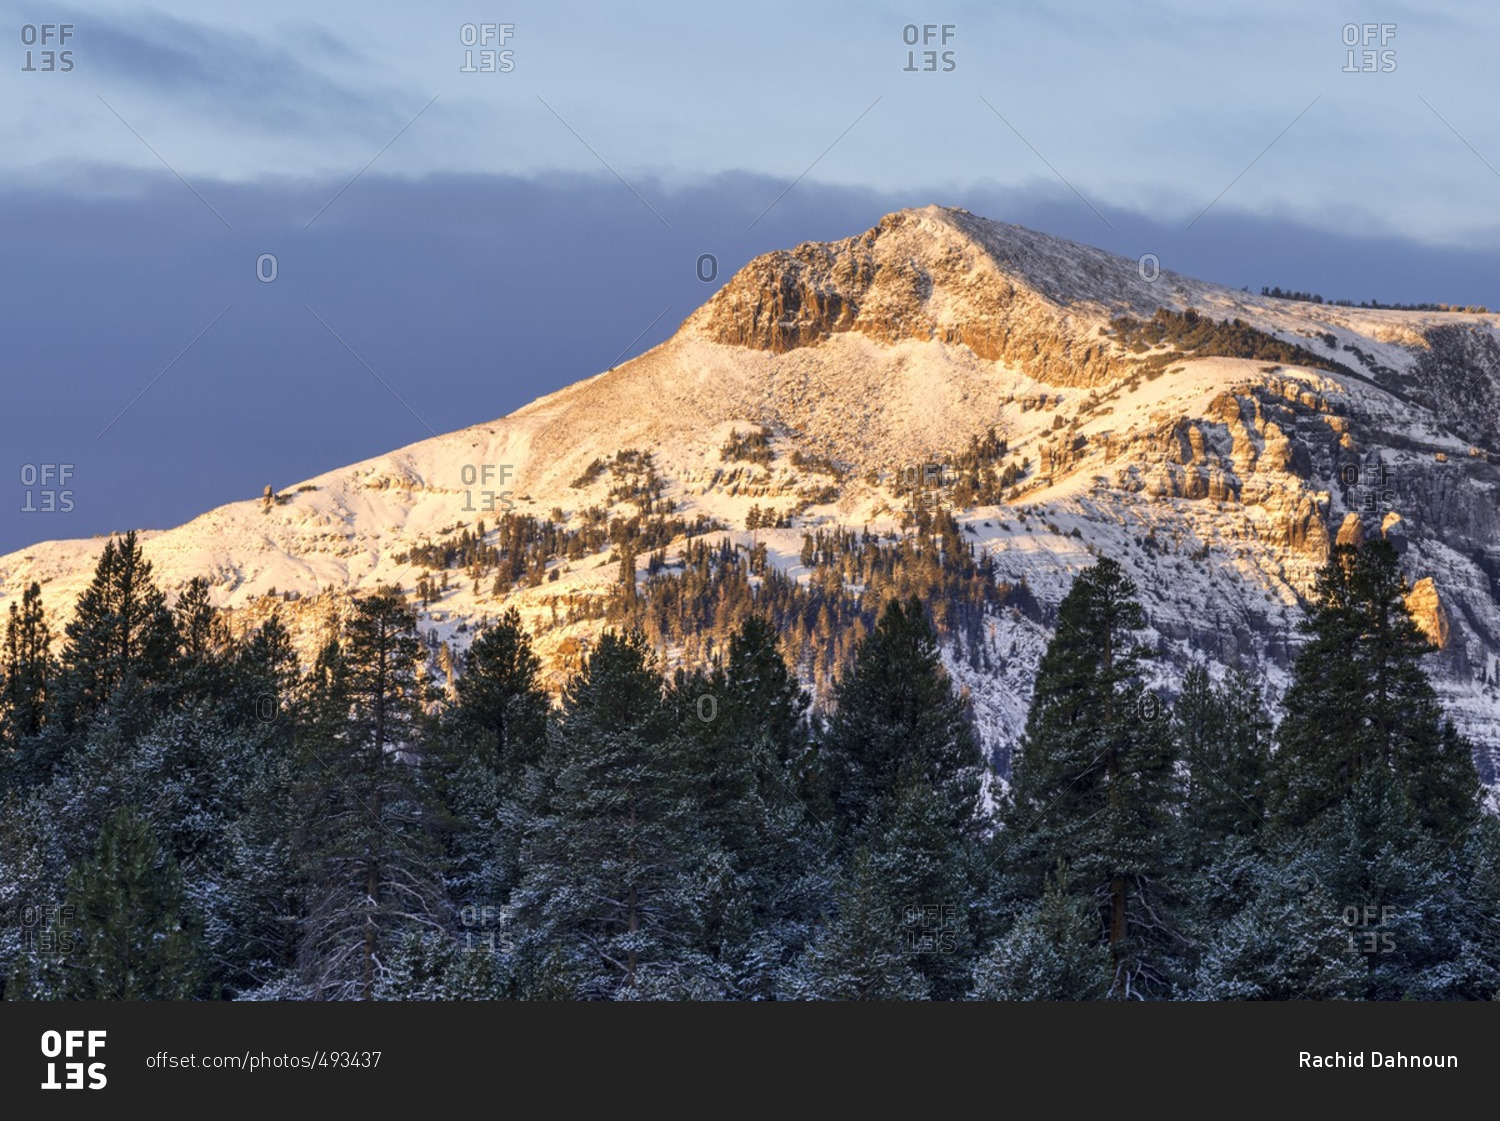 A fresh dusting of snow coats the trees and Stevens Peak at sunrise in Hope Valley, California.